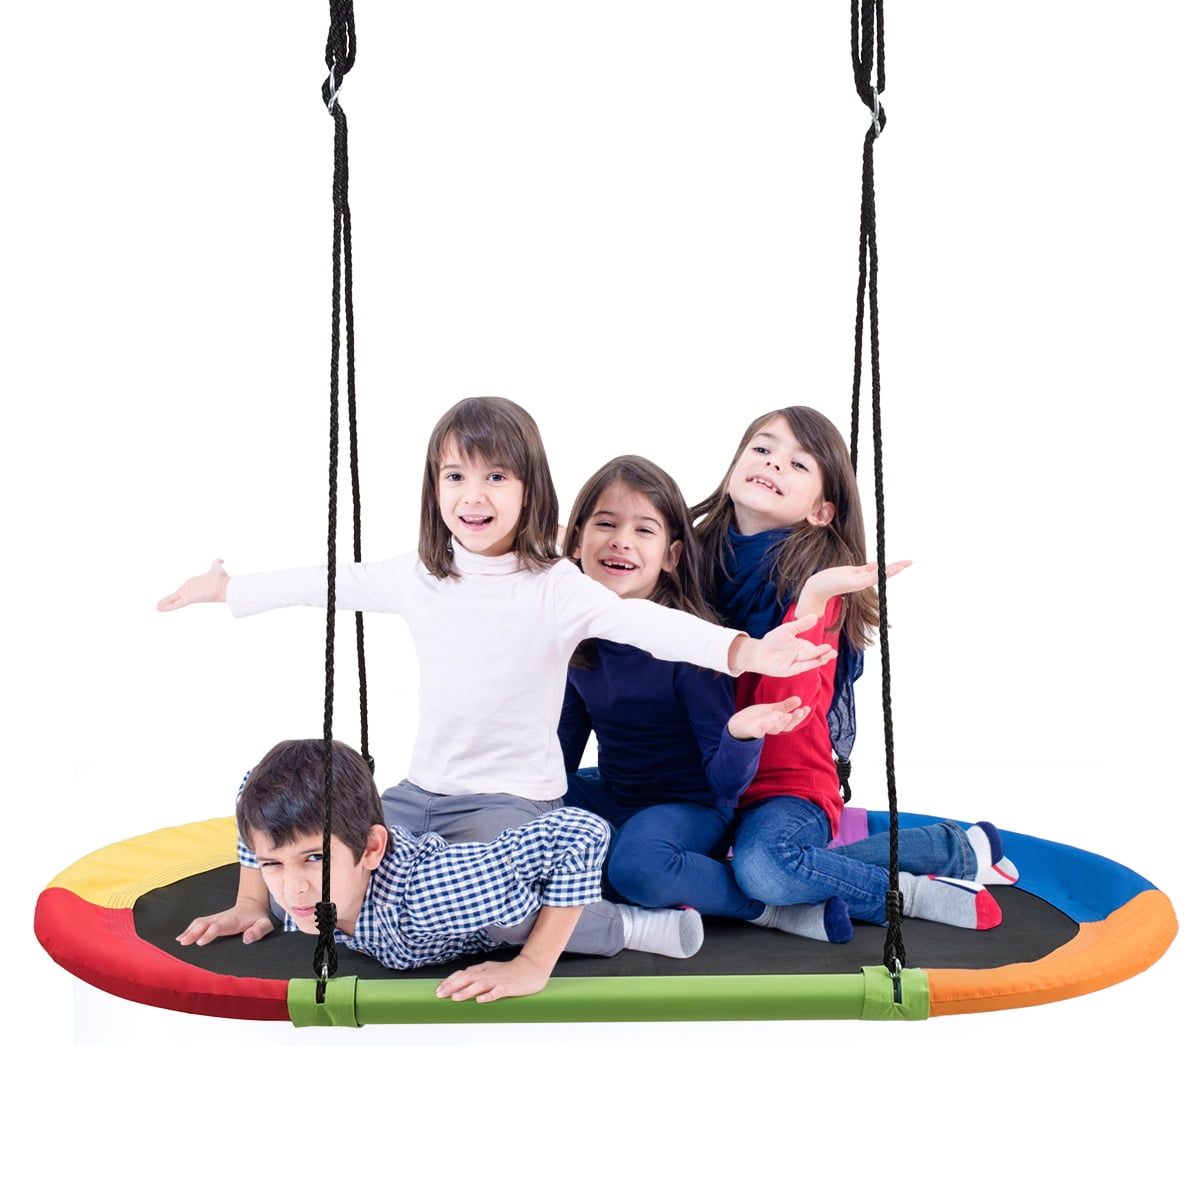 JumpTastic 60in Tree Swing Platform for 6 Kids Thicken Steel Tube Giant Curved Swing Weight Capacity 500lbs for Swing Set or Tree